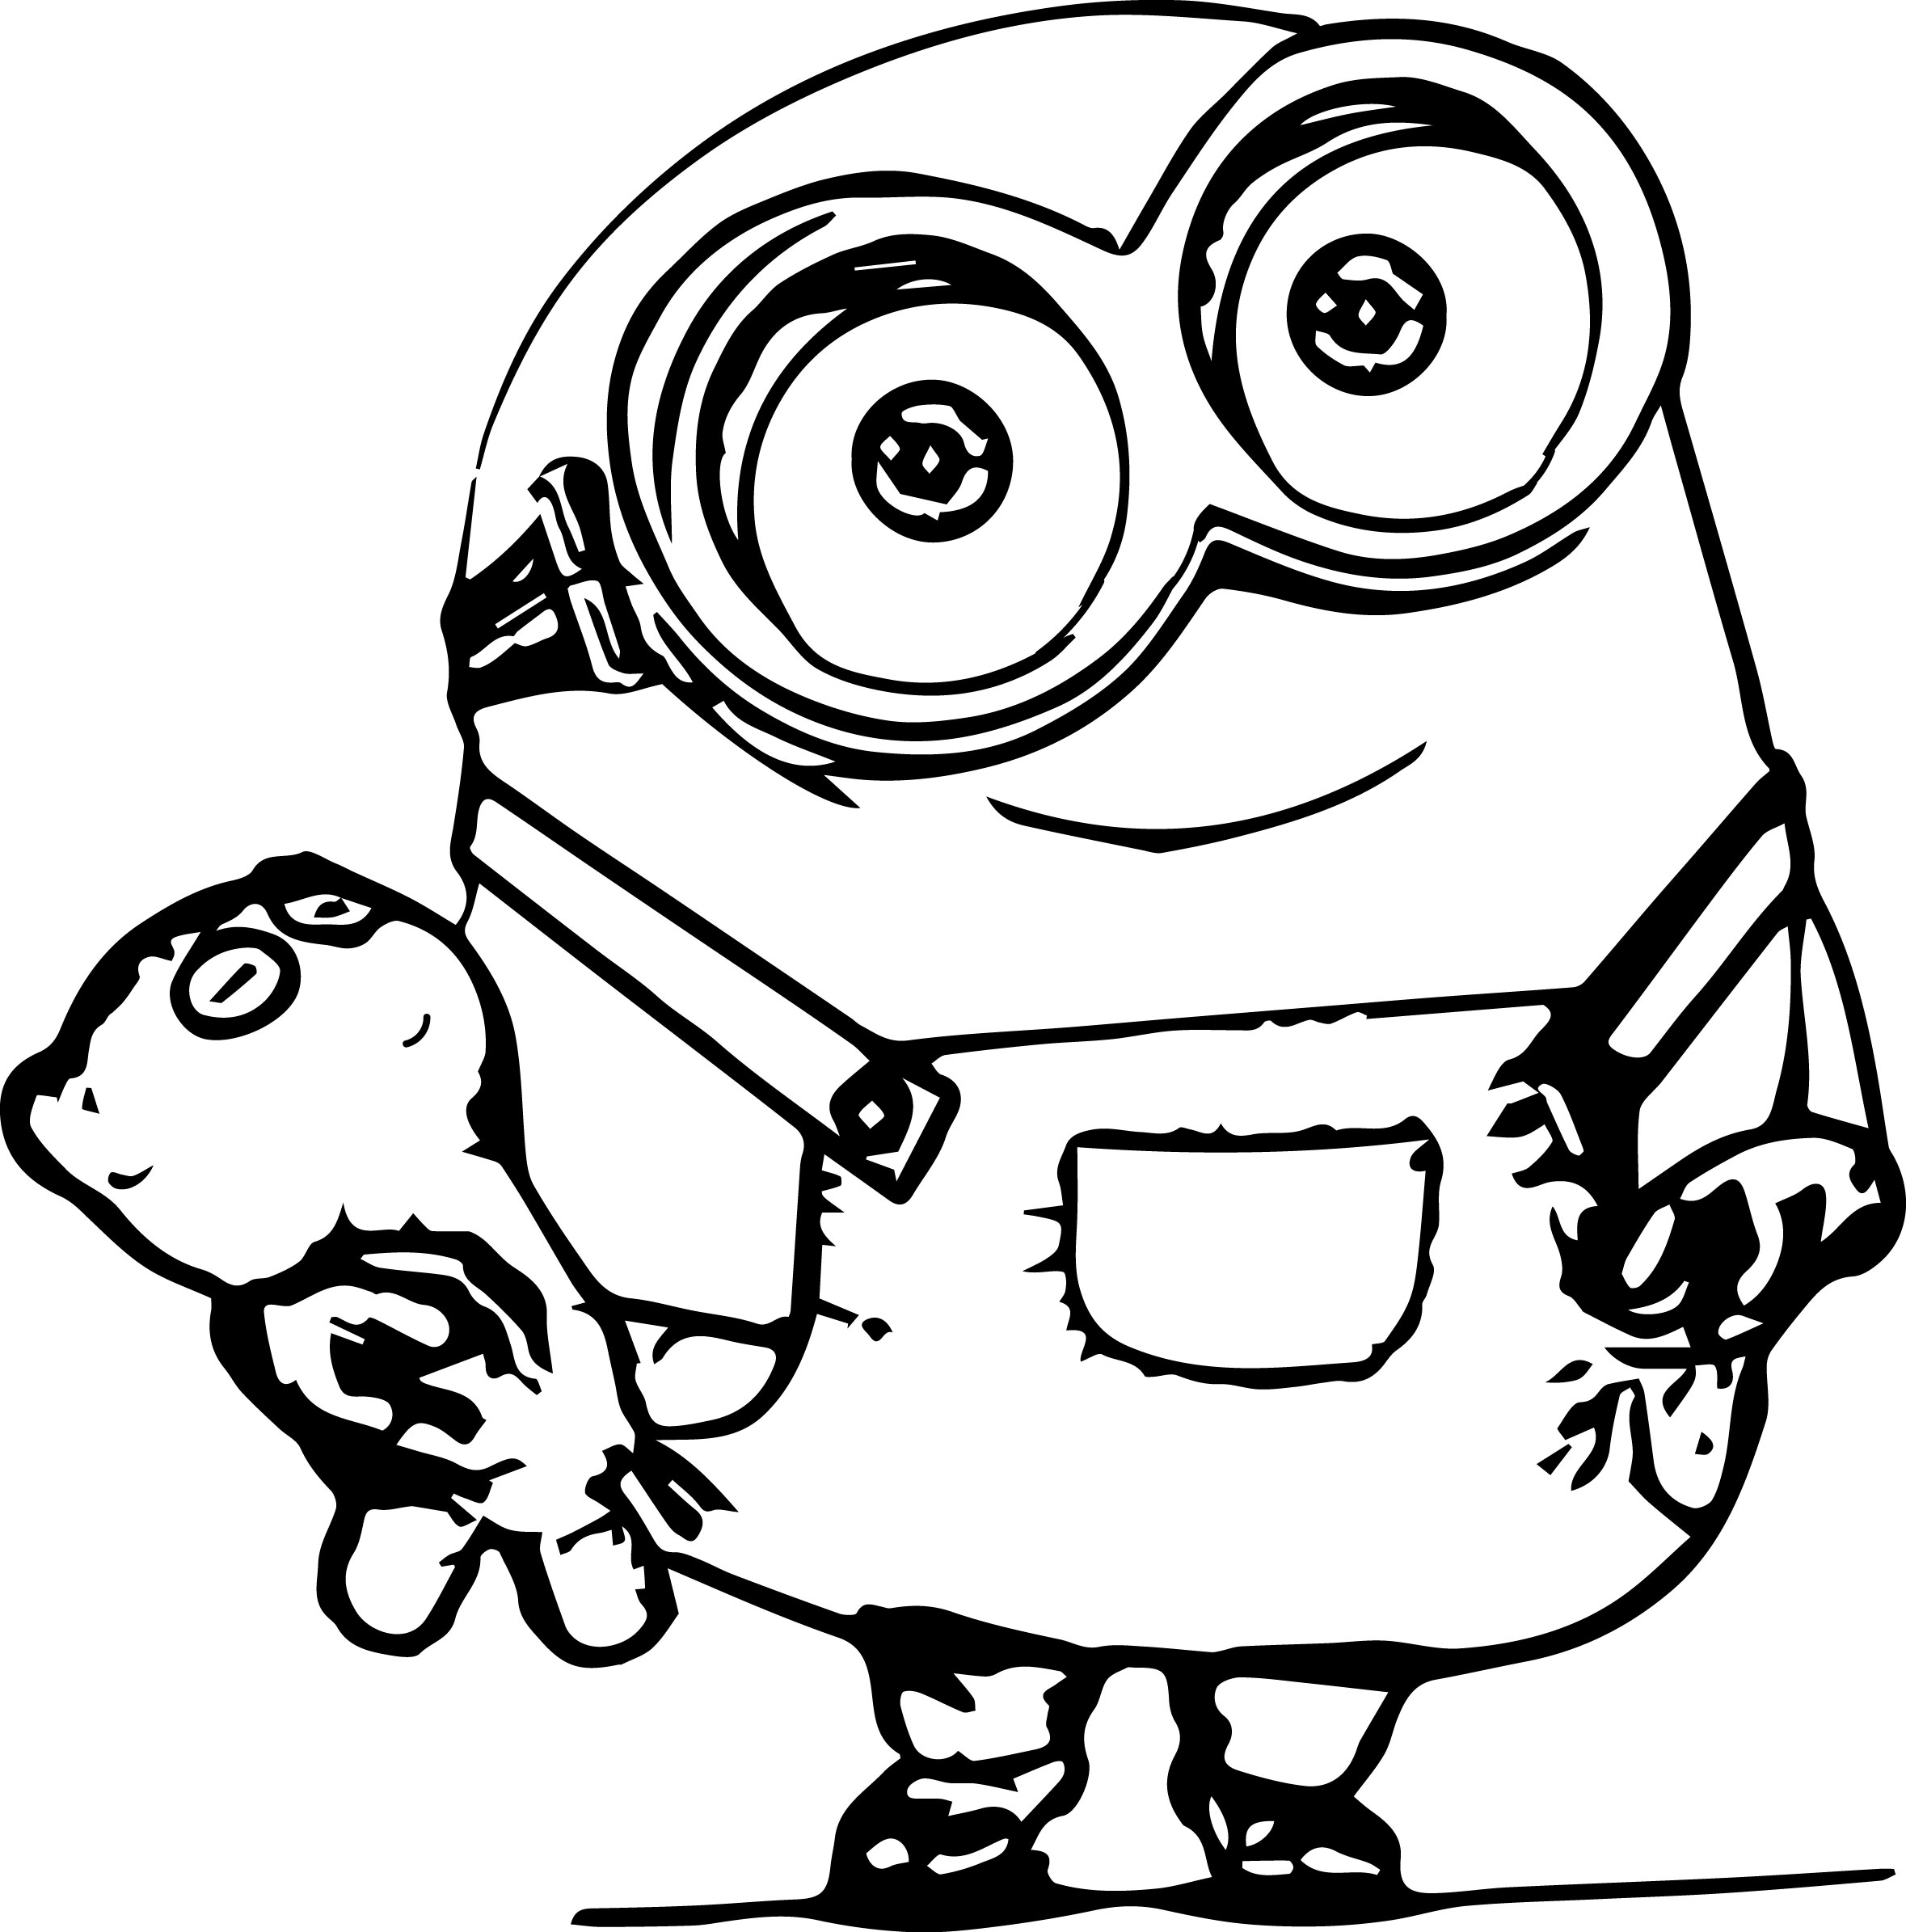 Minion Coloring Pages Rich image and wallpaper